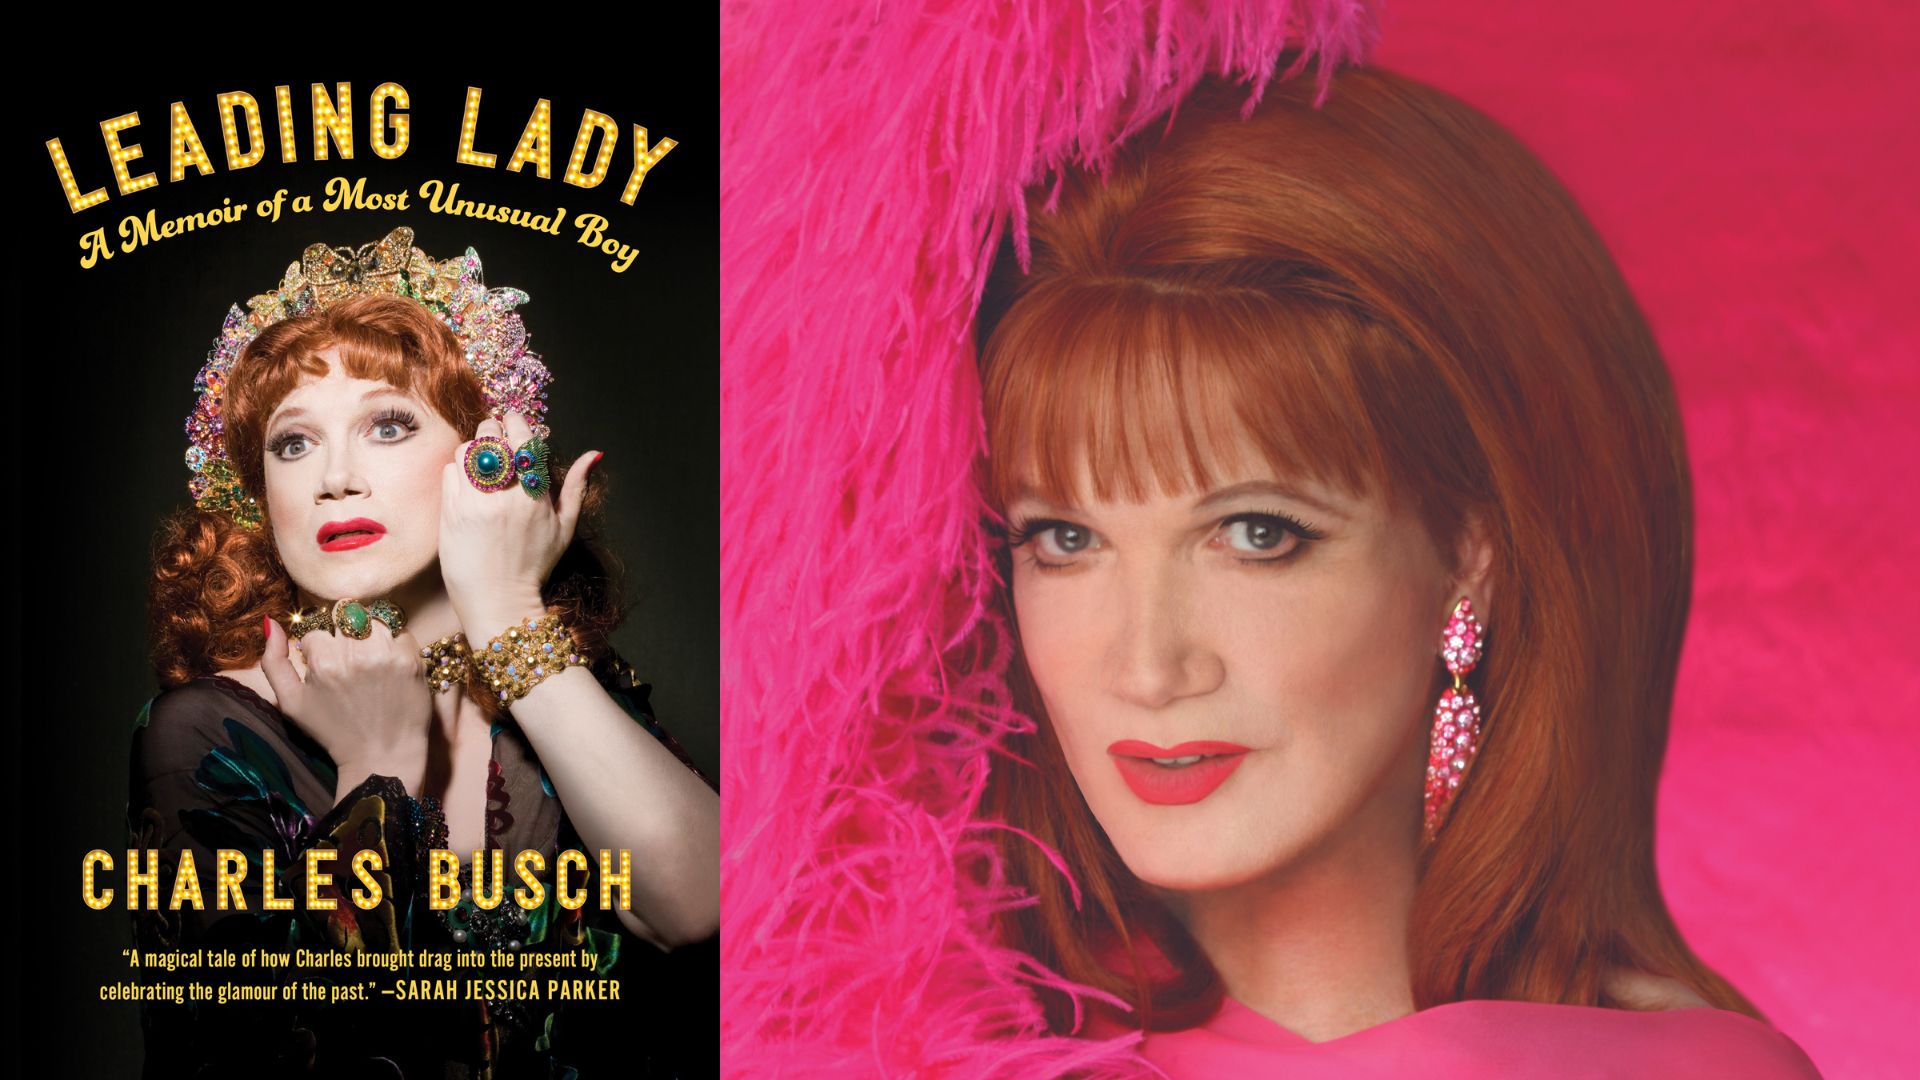 A most unusual leading lady an interview with Charles Busch photo